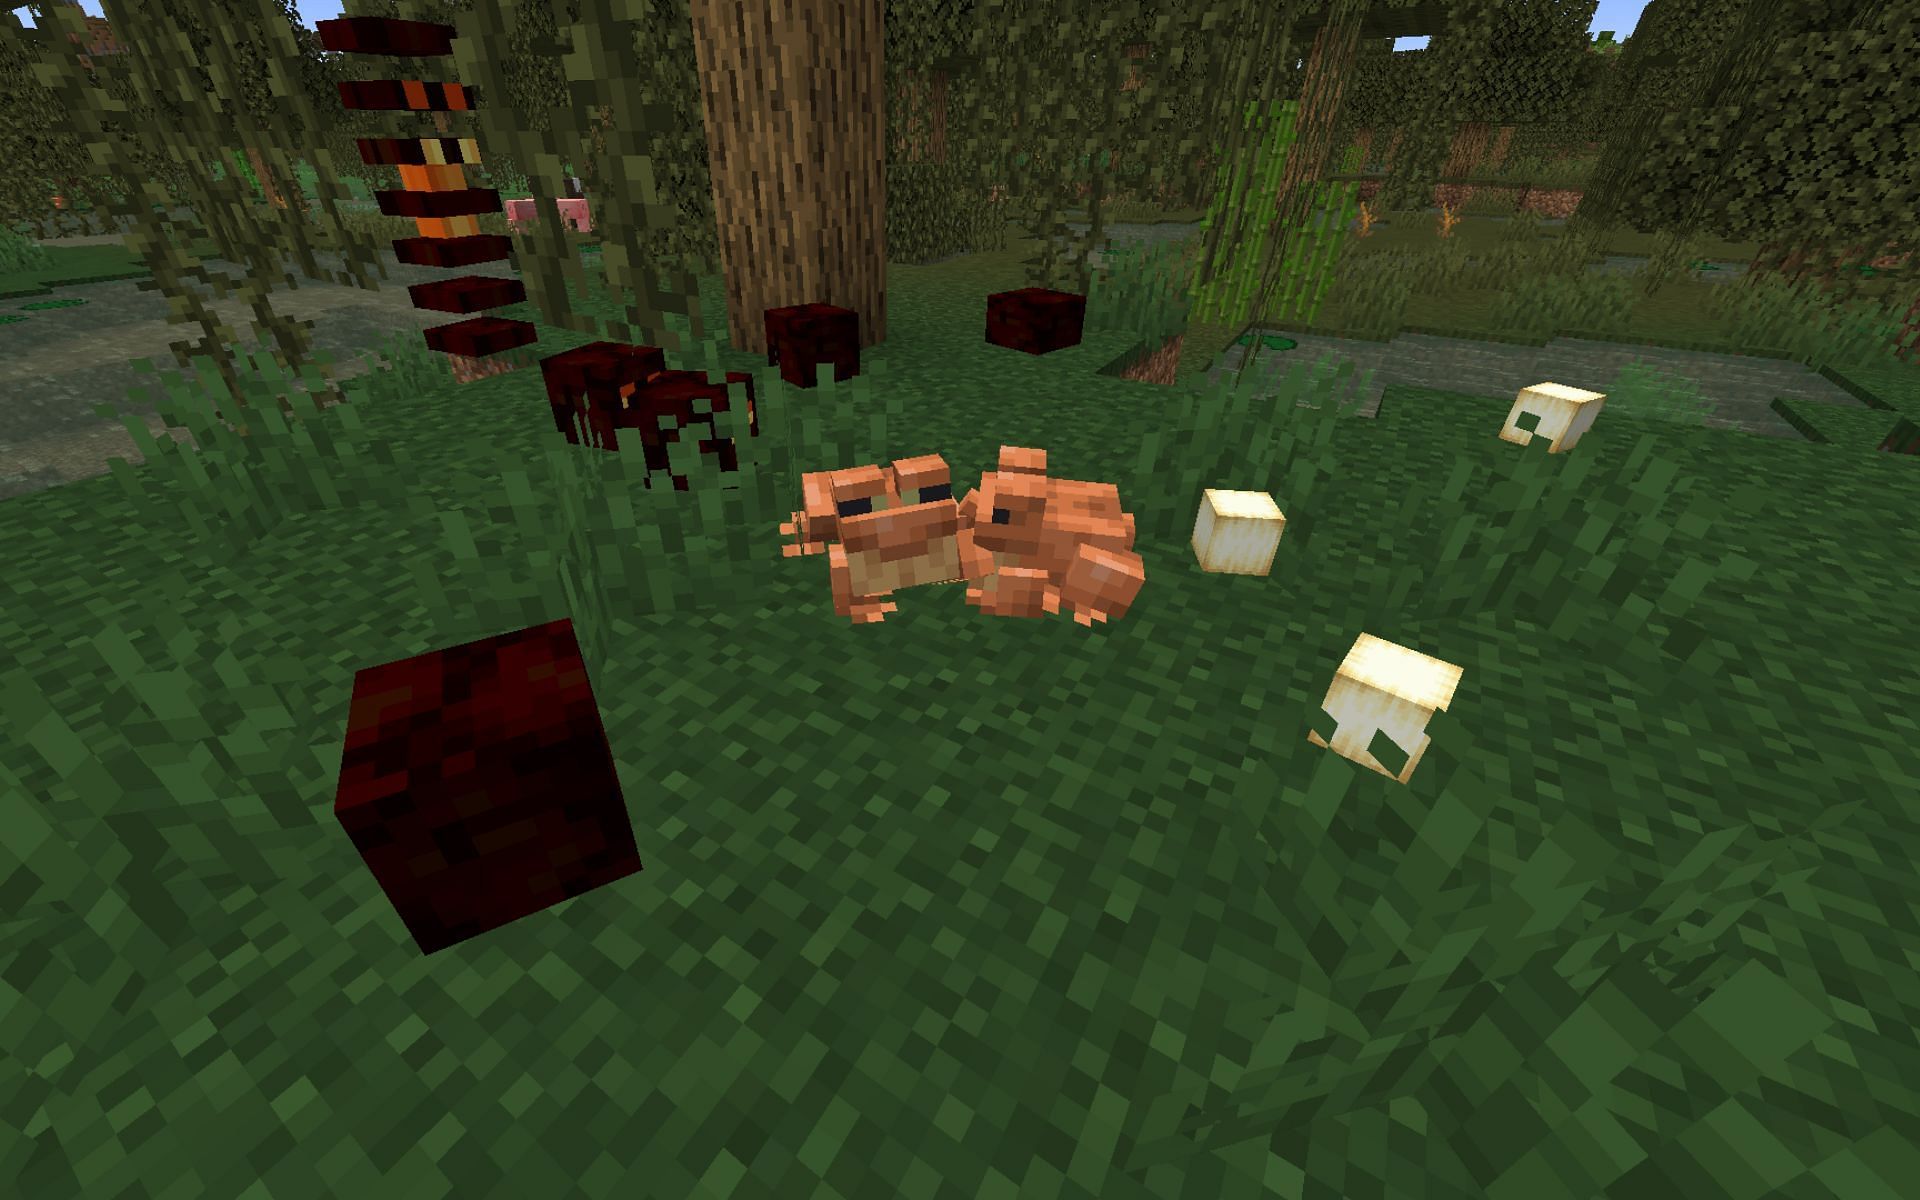 Frogs near small magma cubes (Image via Minecraft 1.19)